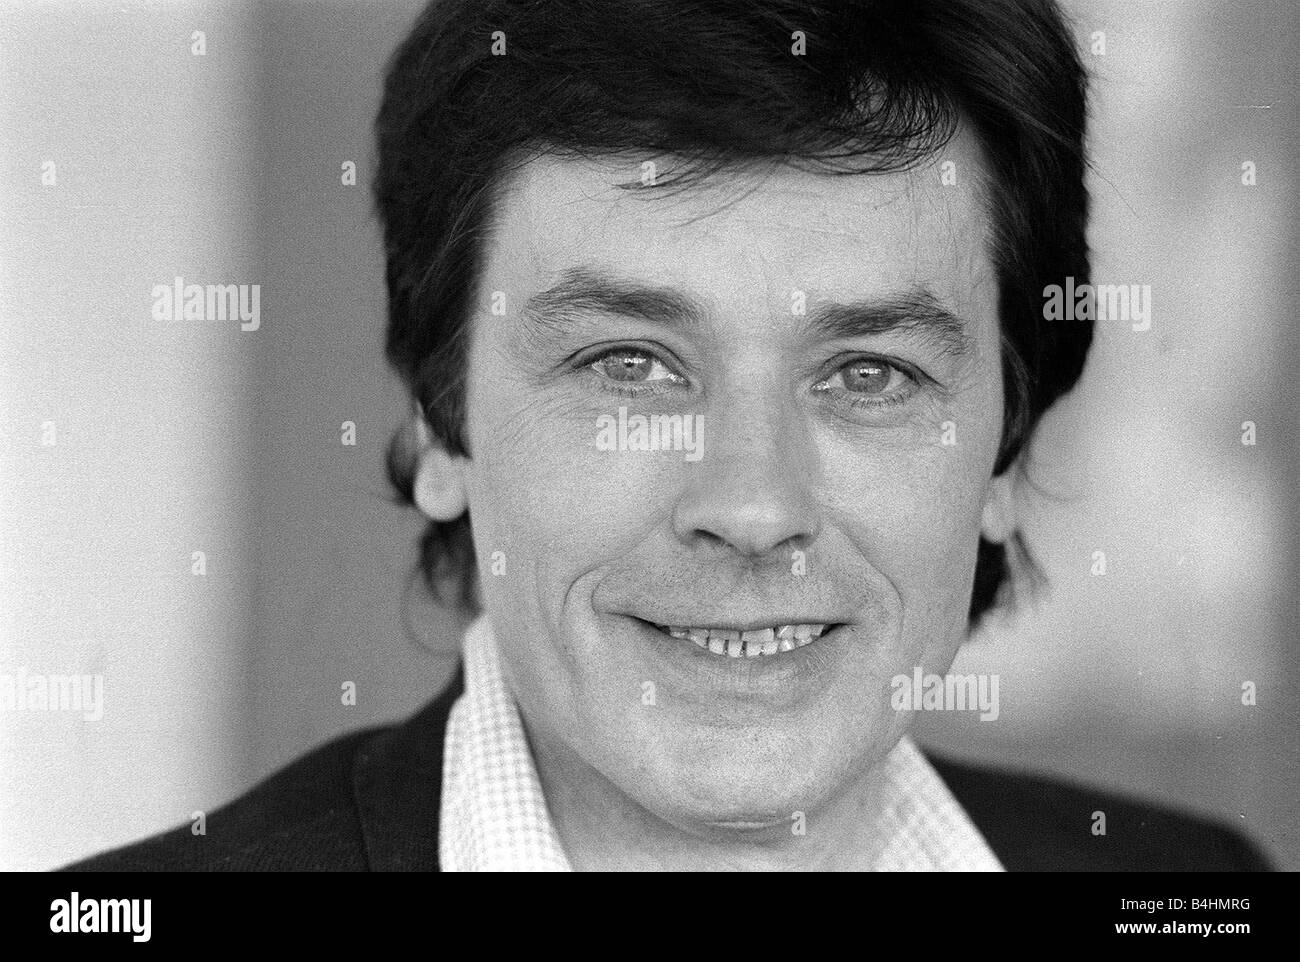 Alain delon hi-res stock photography and images - Alamy